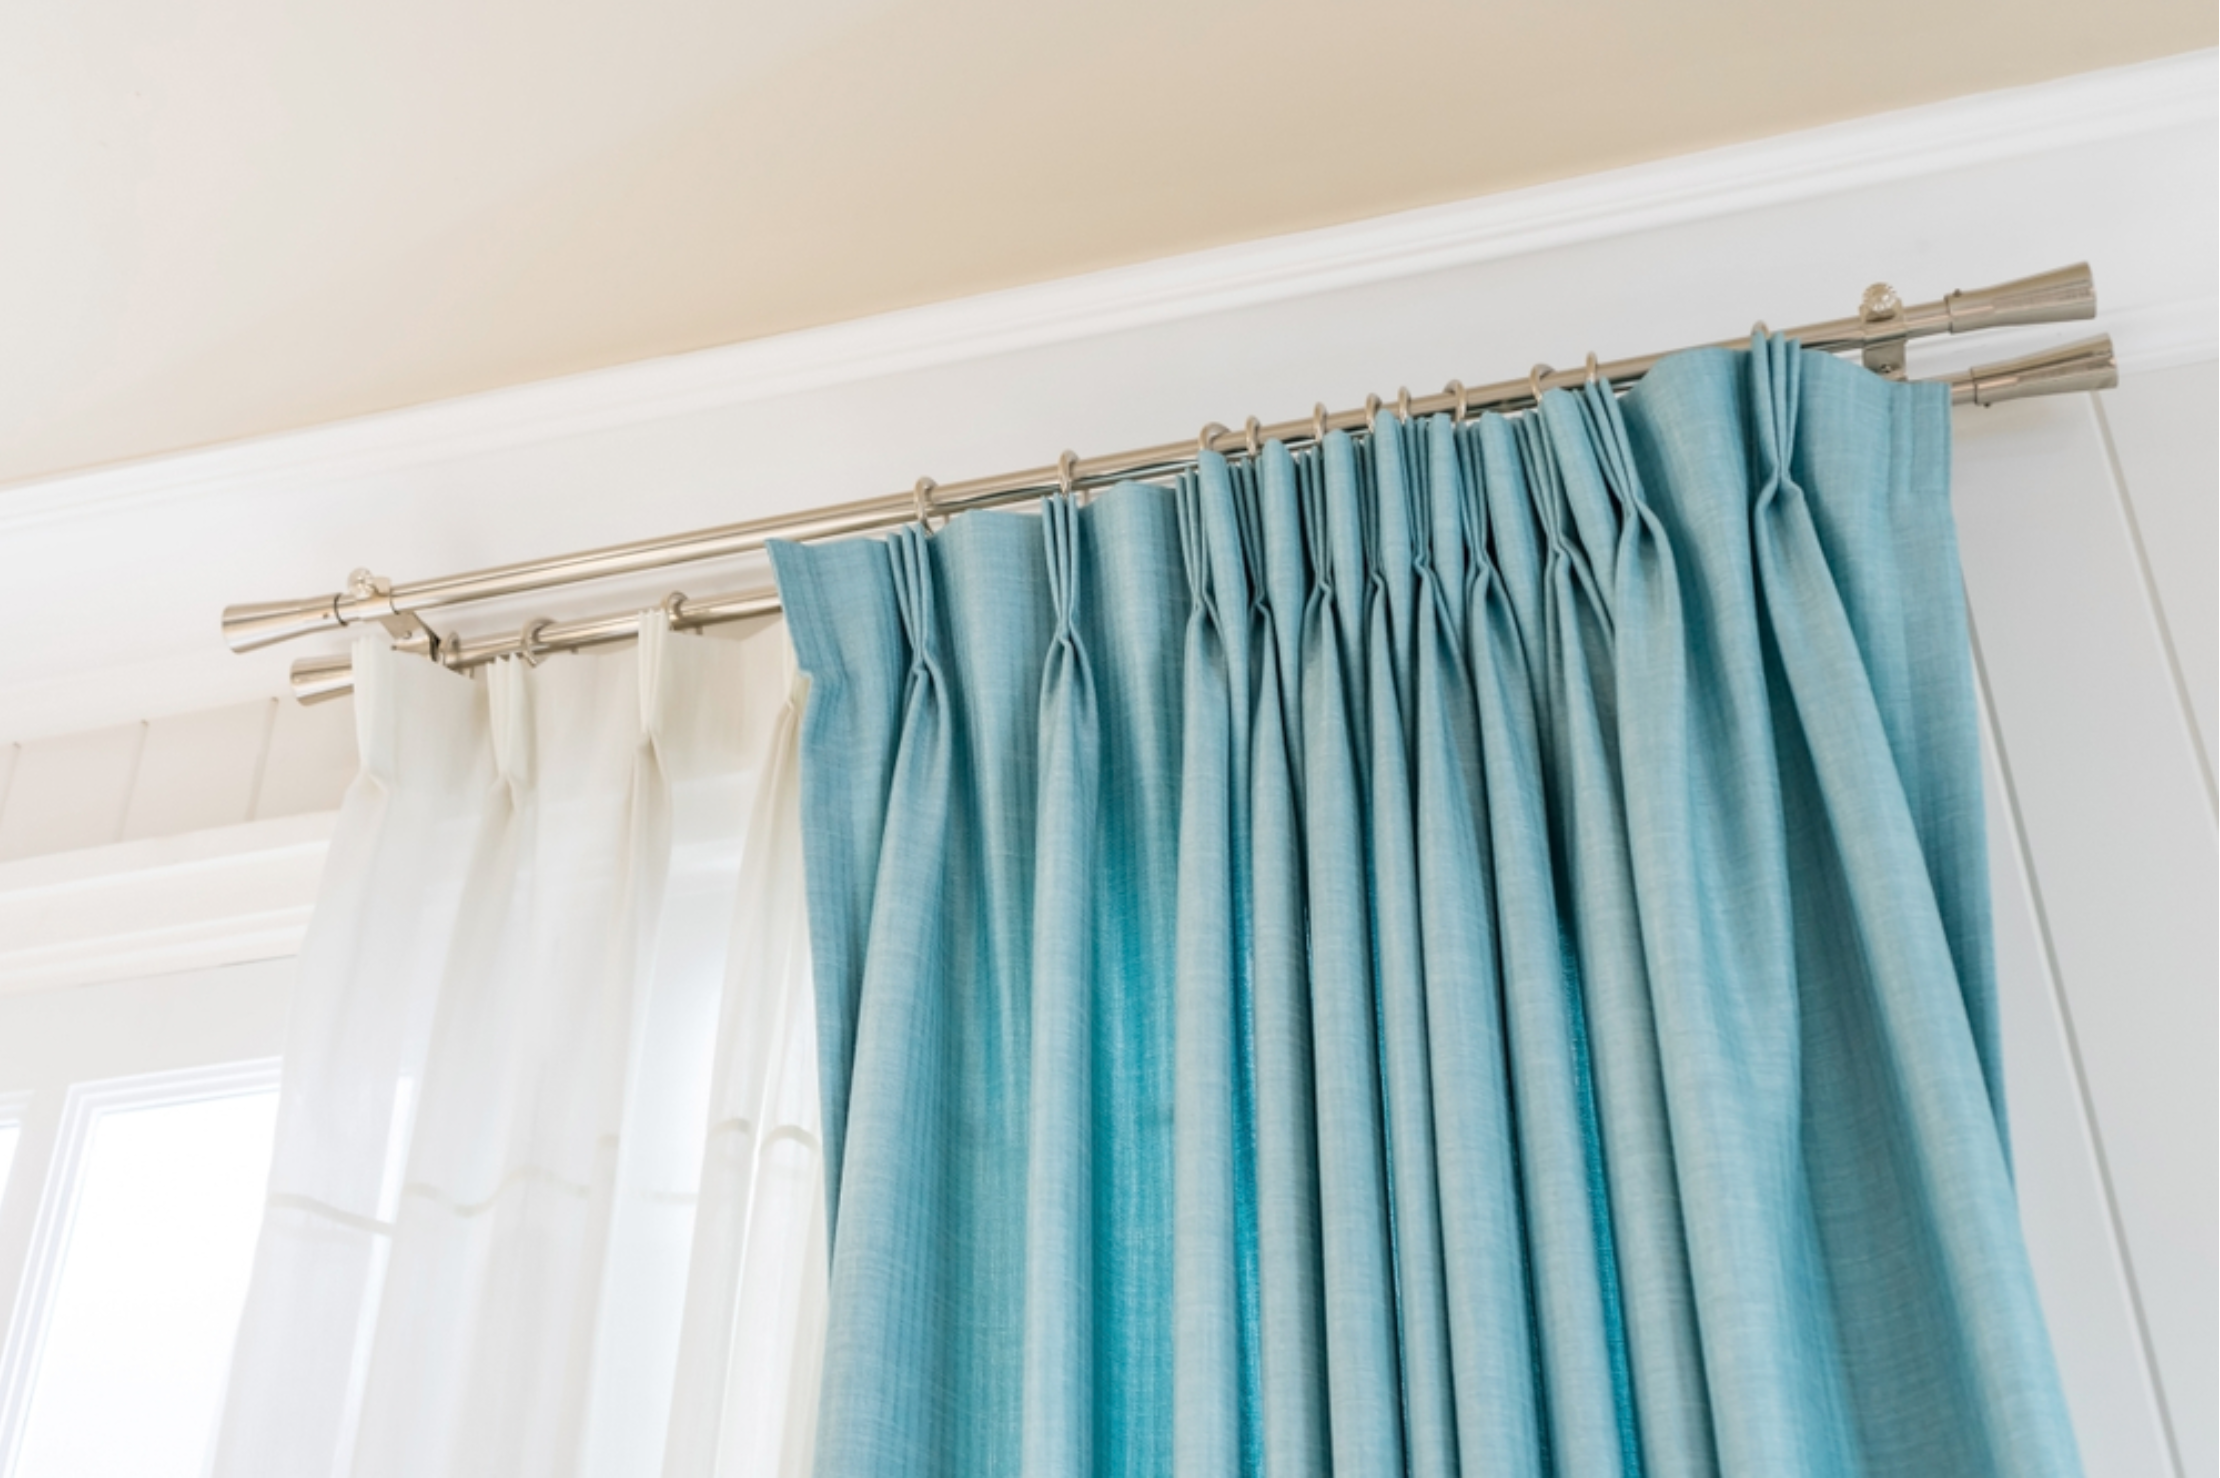 How To Hide Grommets On Curtains Grommet, Back Tab or Rod Pocket Curtains: Which Should I Buy? - Nicetown